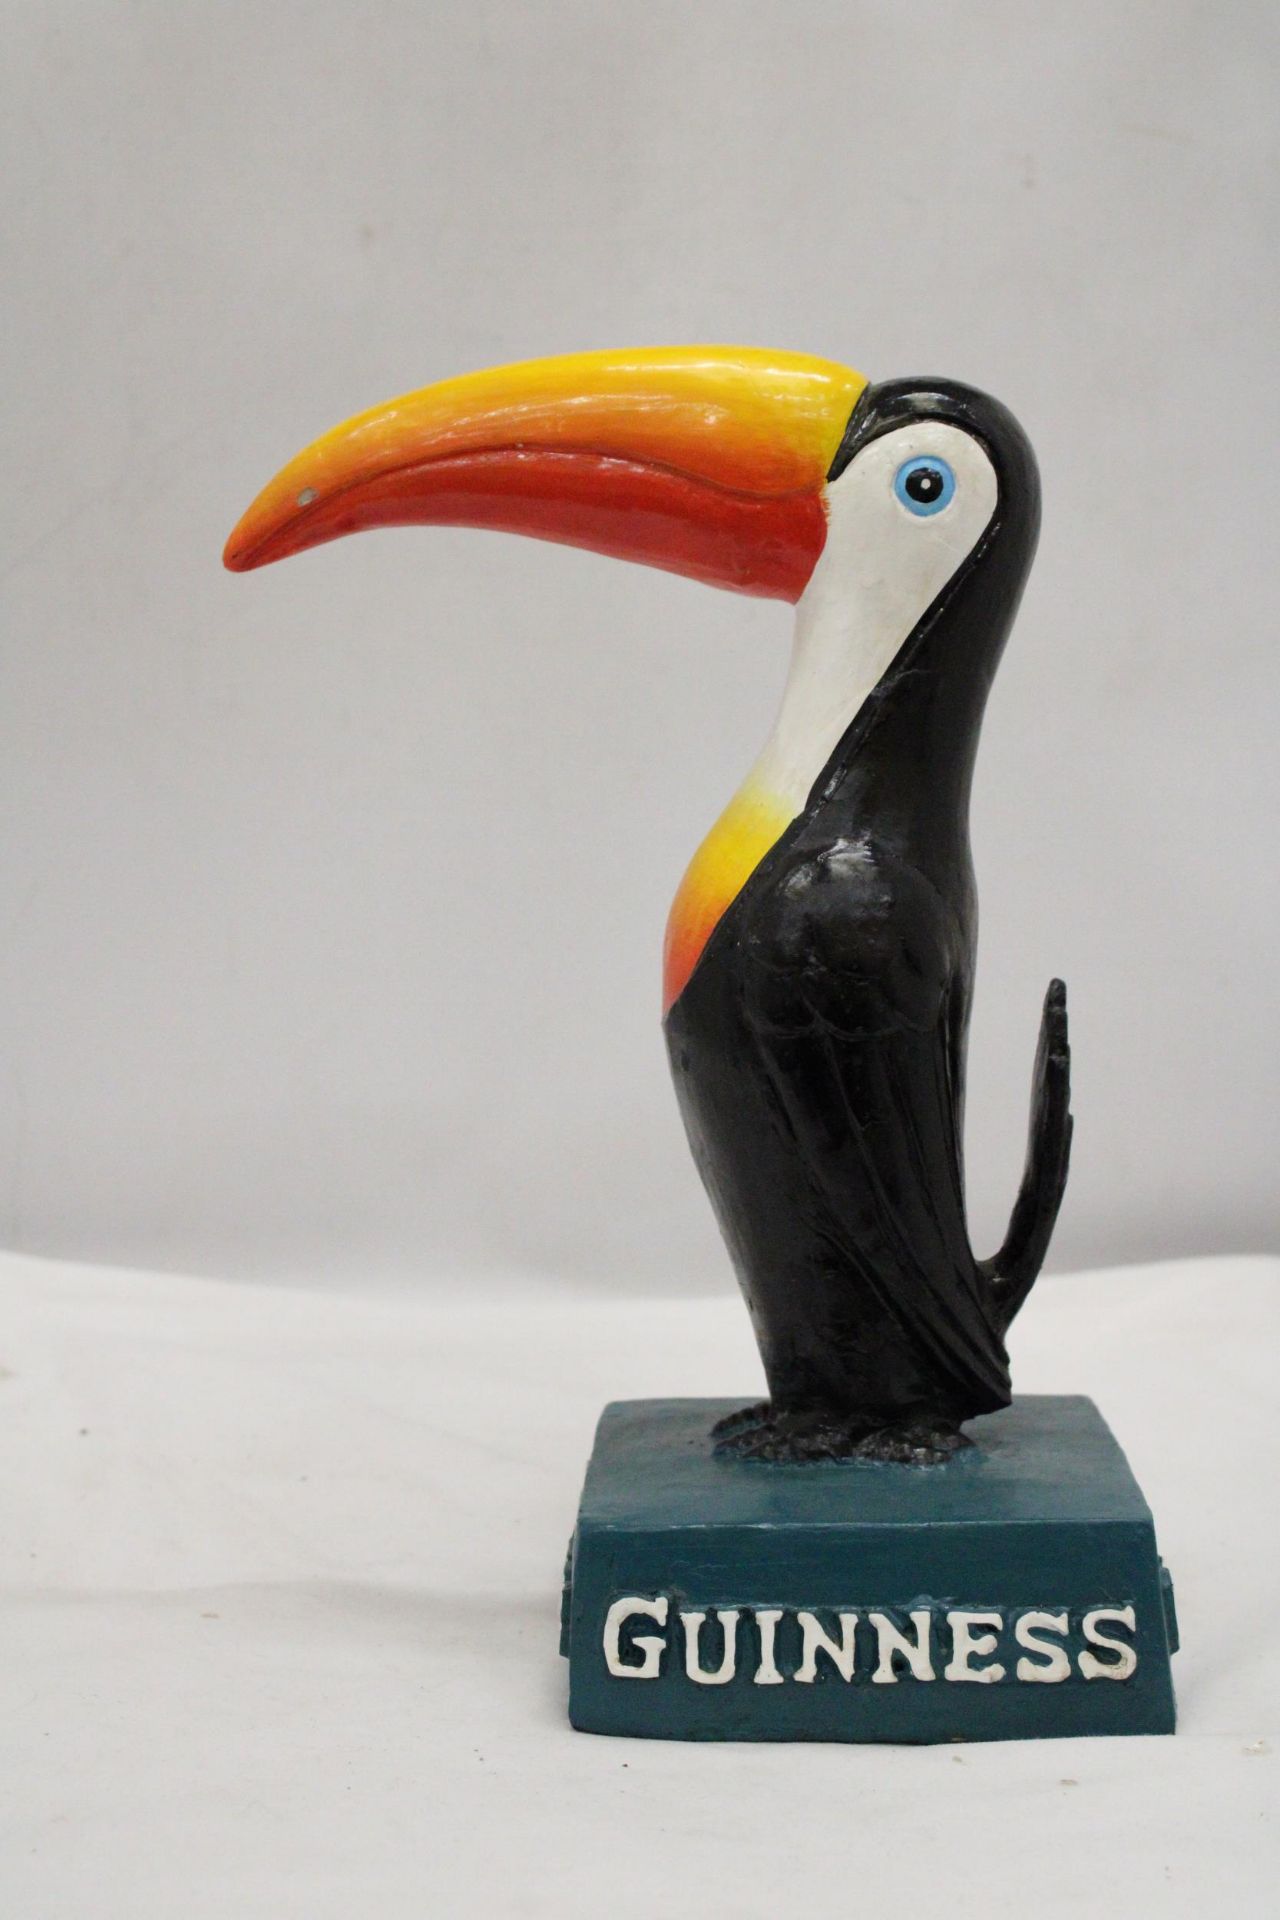 A LARGE RESIN 'GUINNESS' TOUCAN, HEIGHT 30CM - Image 4 of 6